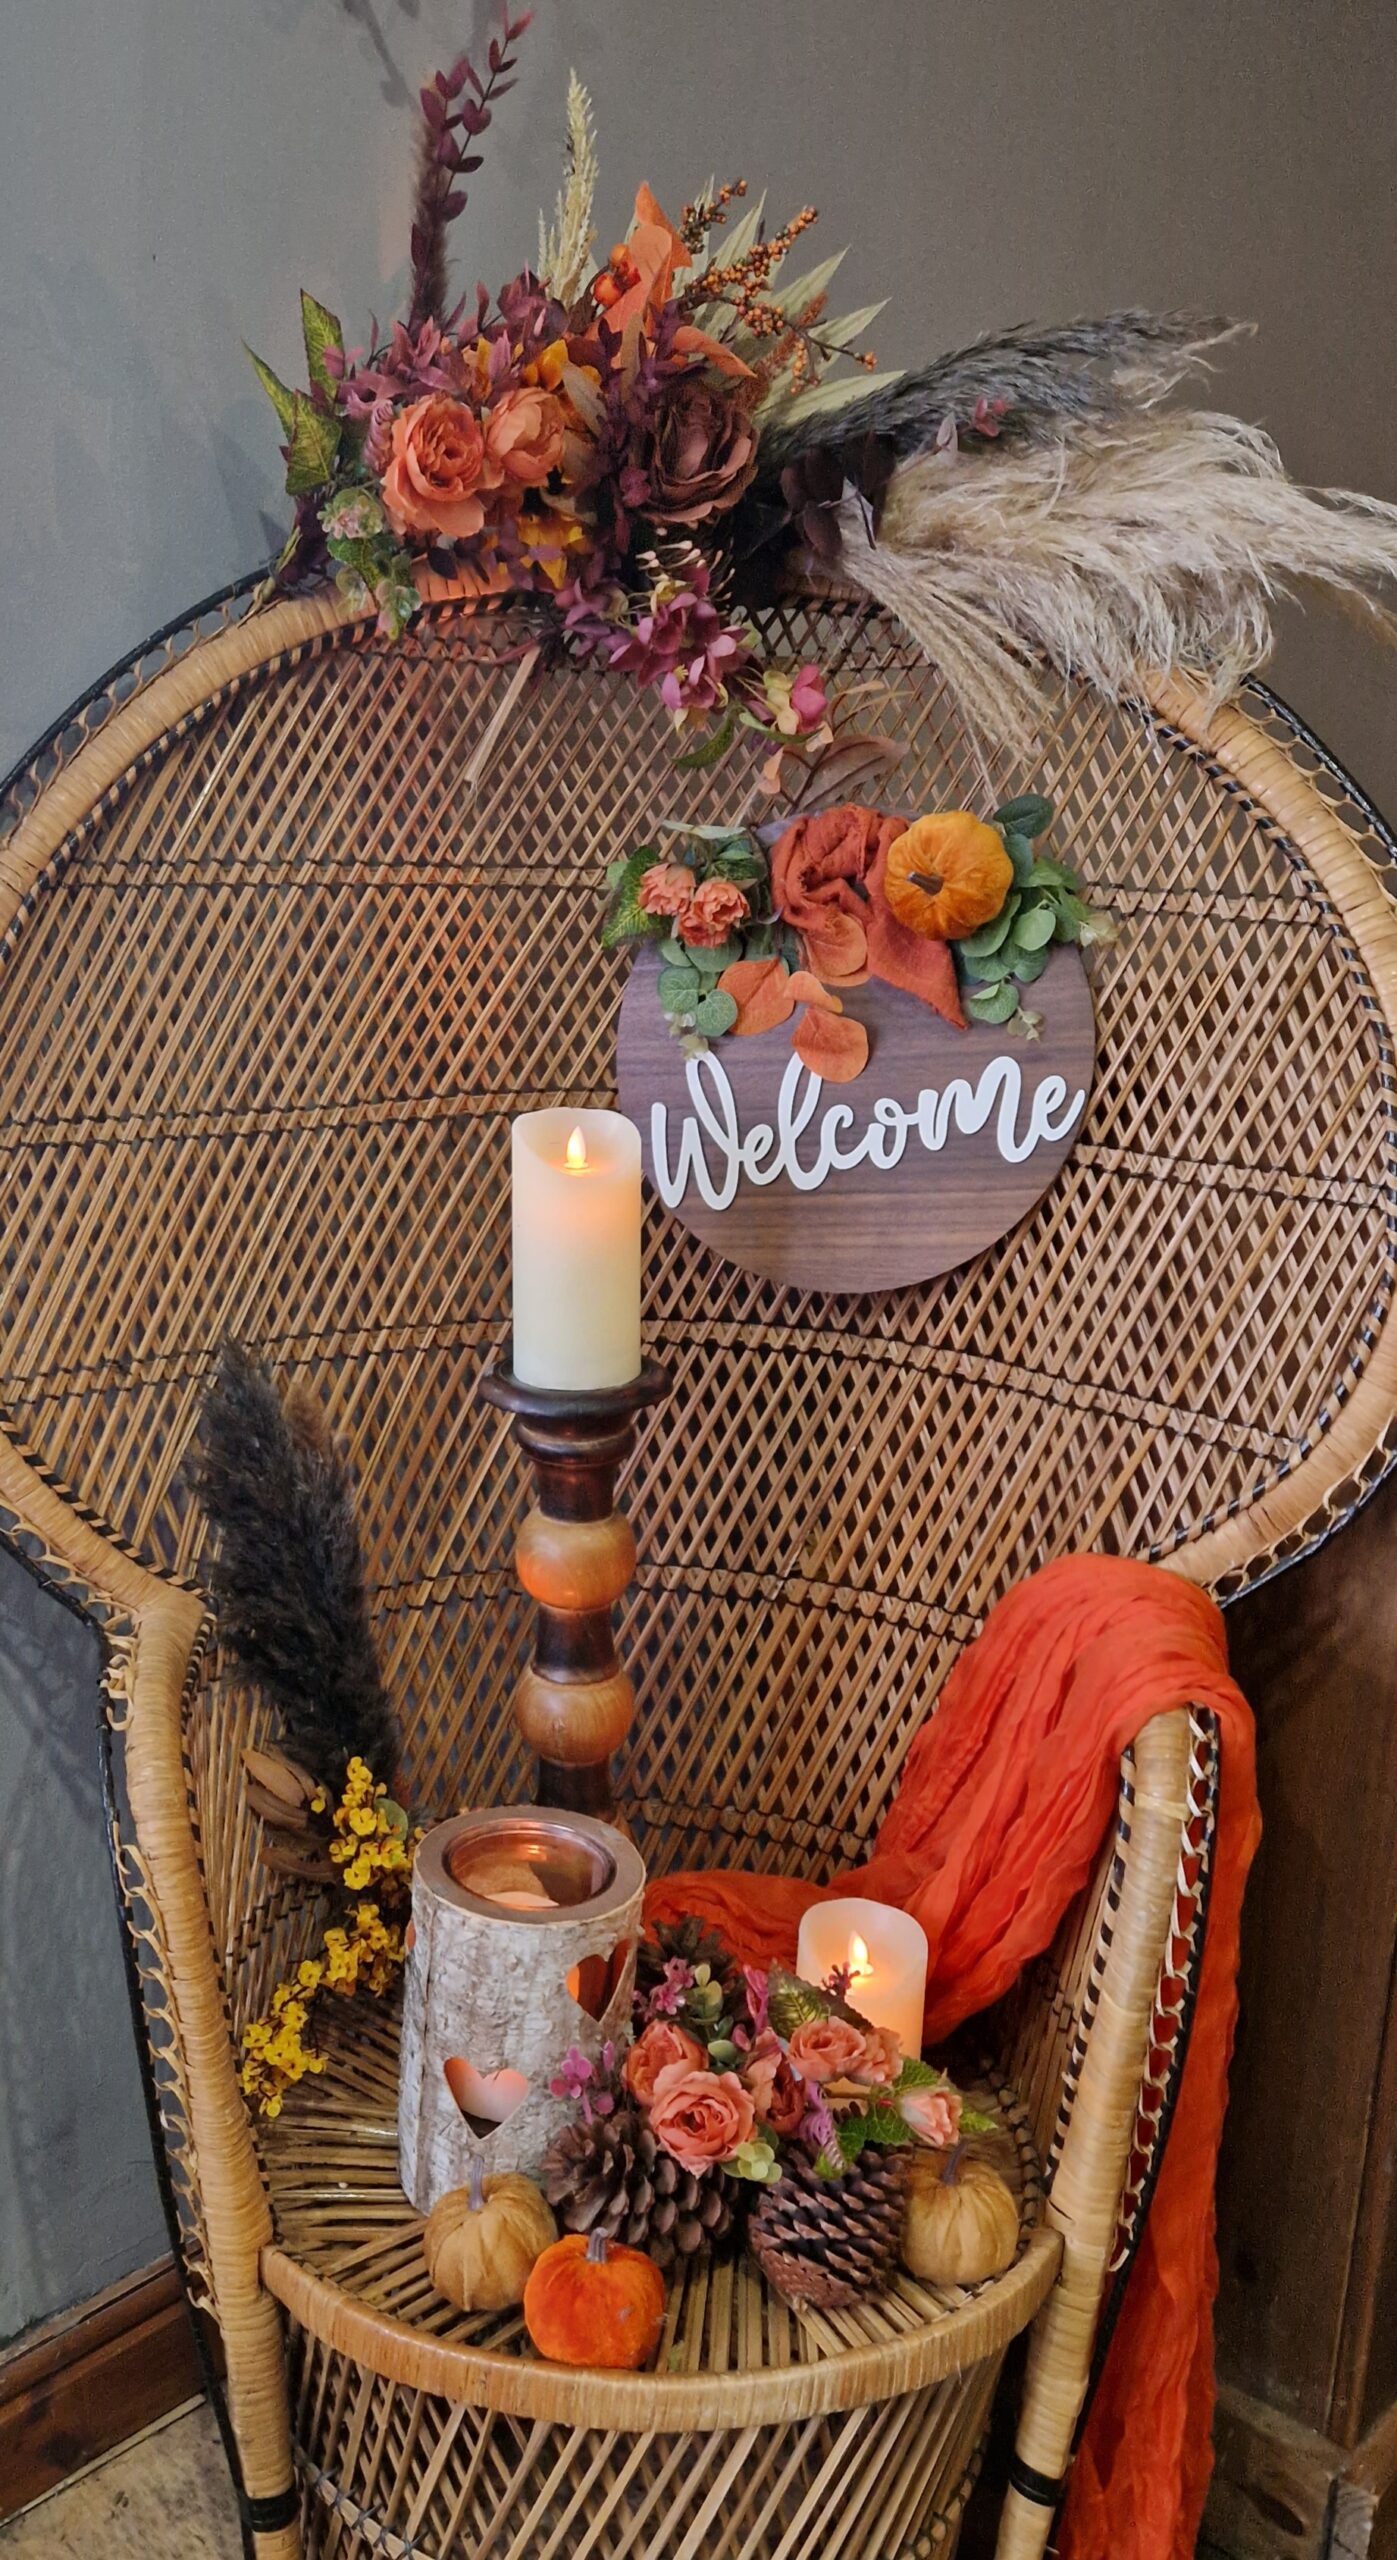 Large peacock chair with wooden welcome sign, rust orange swag and candles